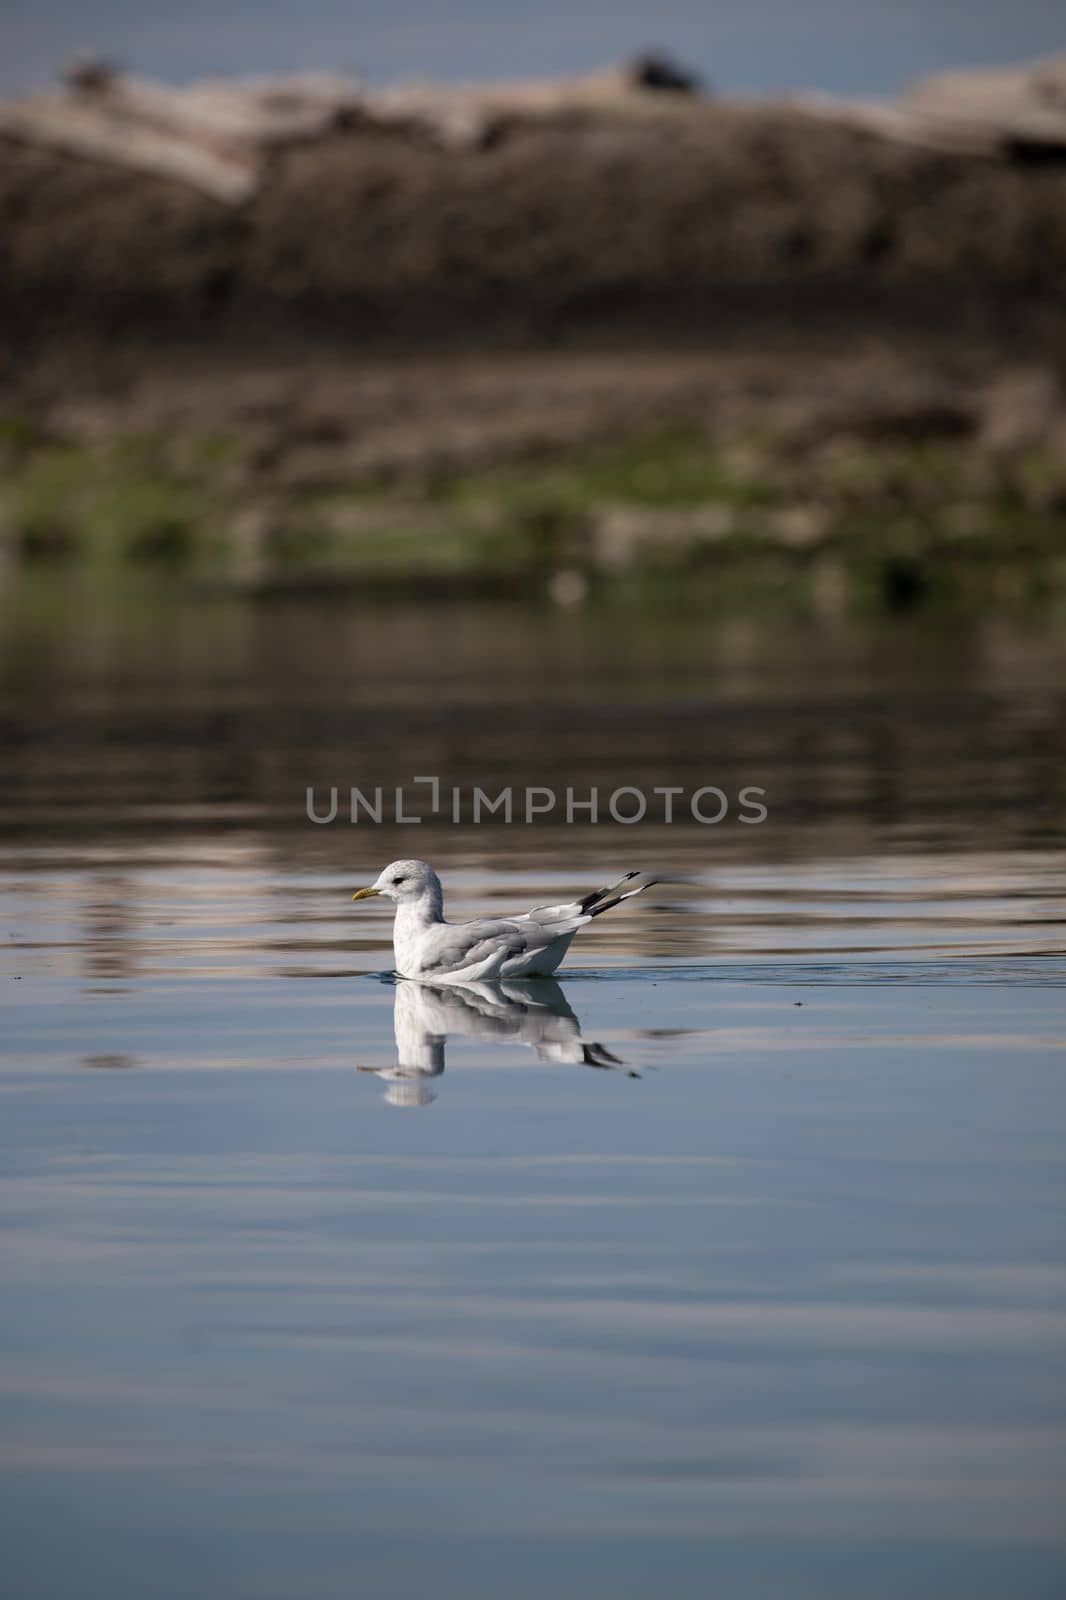 A short-billed gull formerly known as mew gull swimming in water with its reflection near a rocky shore, Gulf Island National Marine Park